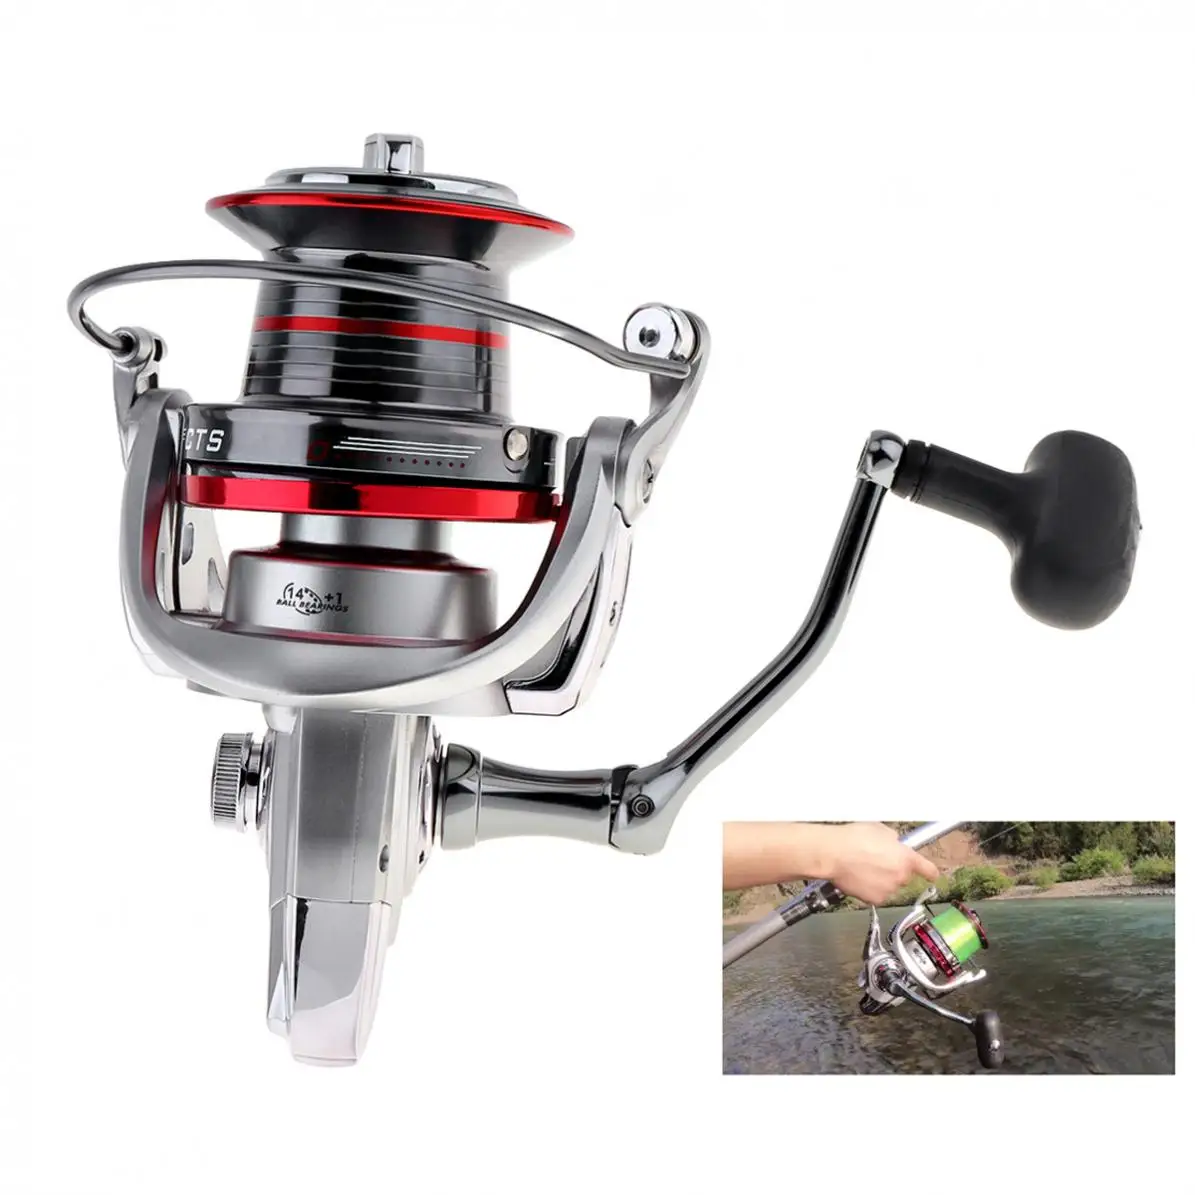 Full Metal Spinning Fishing Reel 9000 Series 14+1 Ball Bearing 20KG / 44LB Long Distance Surfcasting Wheel with Larger Spool